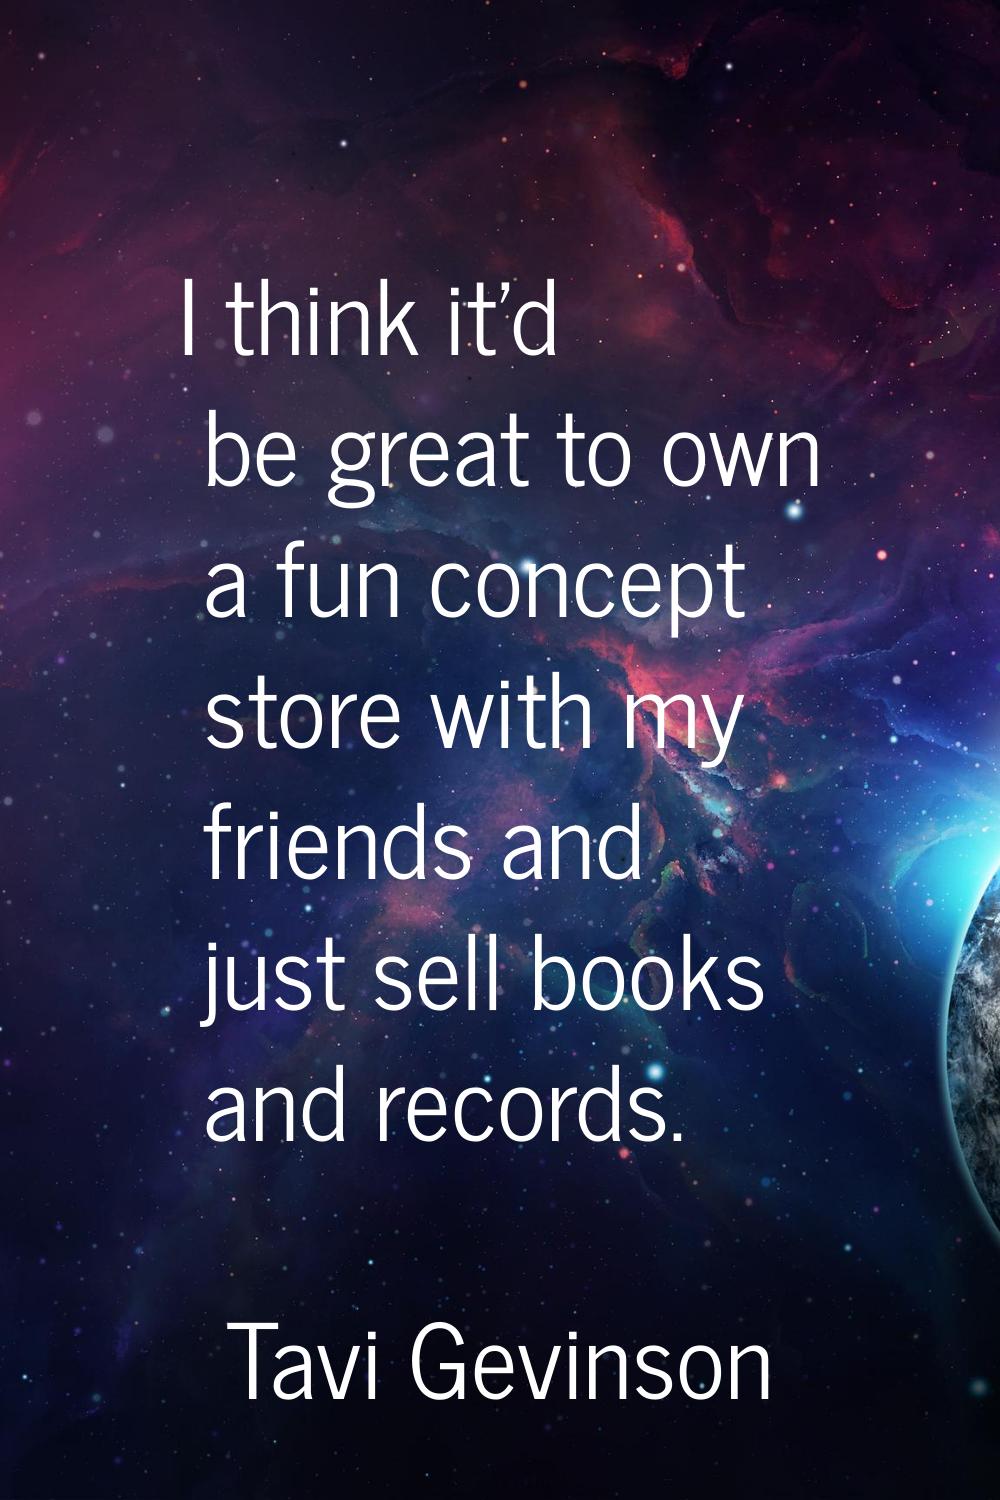 I think it'd be great to own a fun concept store with my friends and just sell books and records.